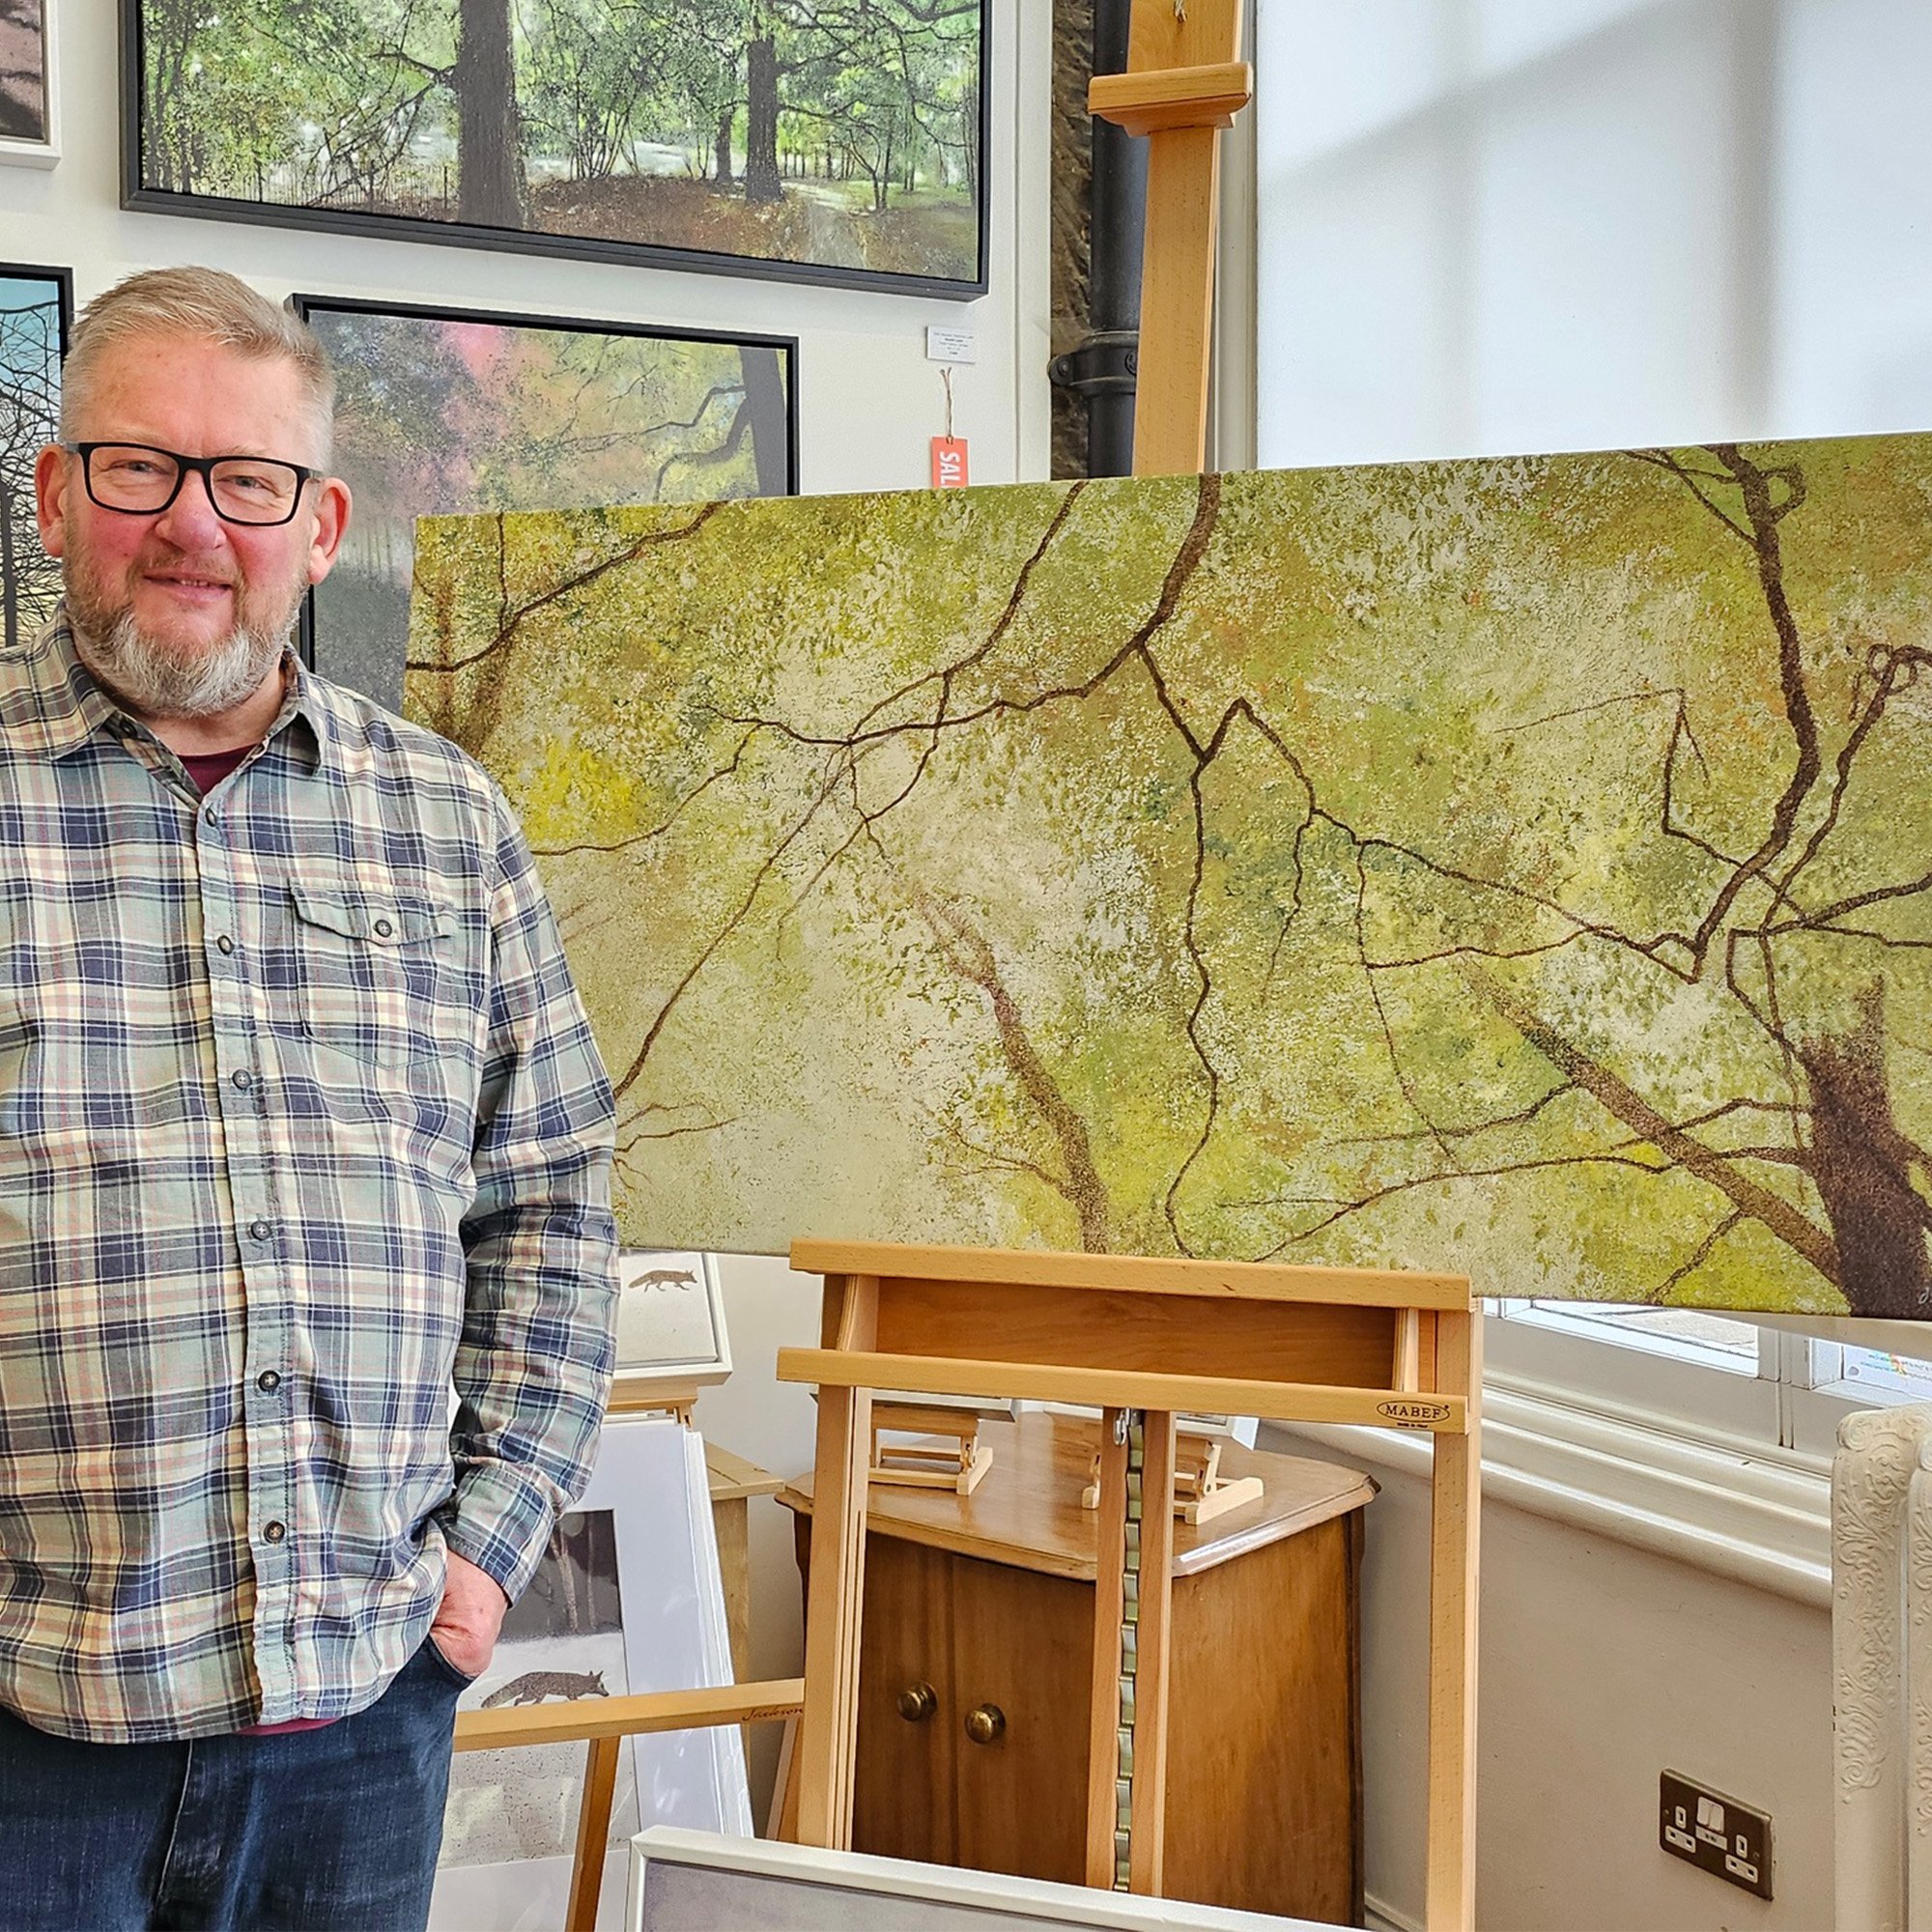 The 1.2-metre-long canvas from @davidlyonart will hang proudly in Shirley&rsquo;s home! 🏠

'Late Autumn Treetops' is one of David's stunning larger creations and was recently bought by Shirley who will hang the artwork in her hallway 🫶

Are you an 